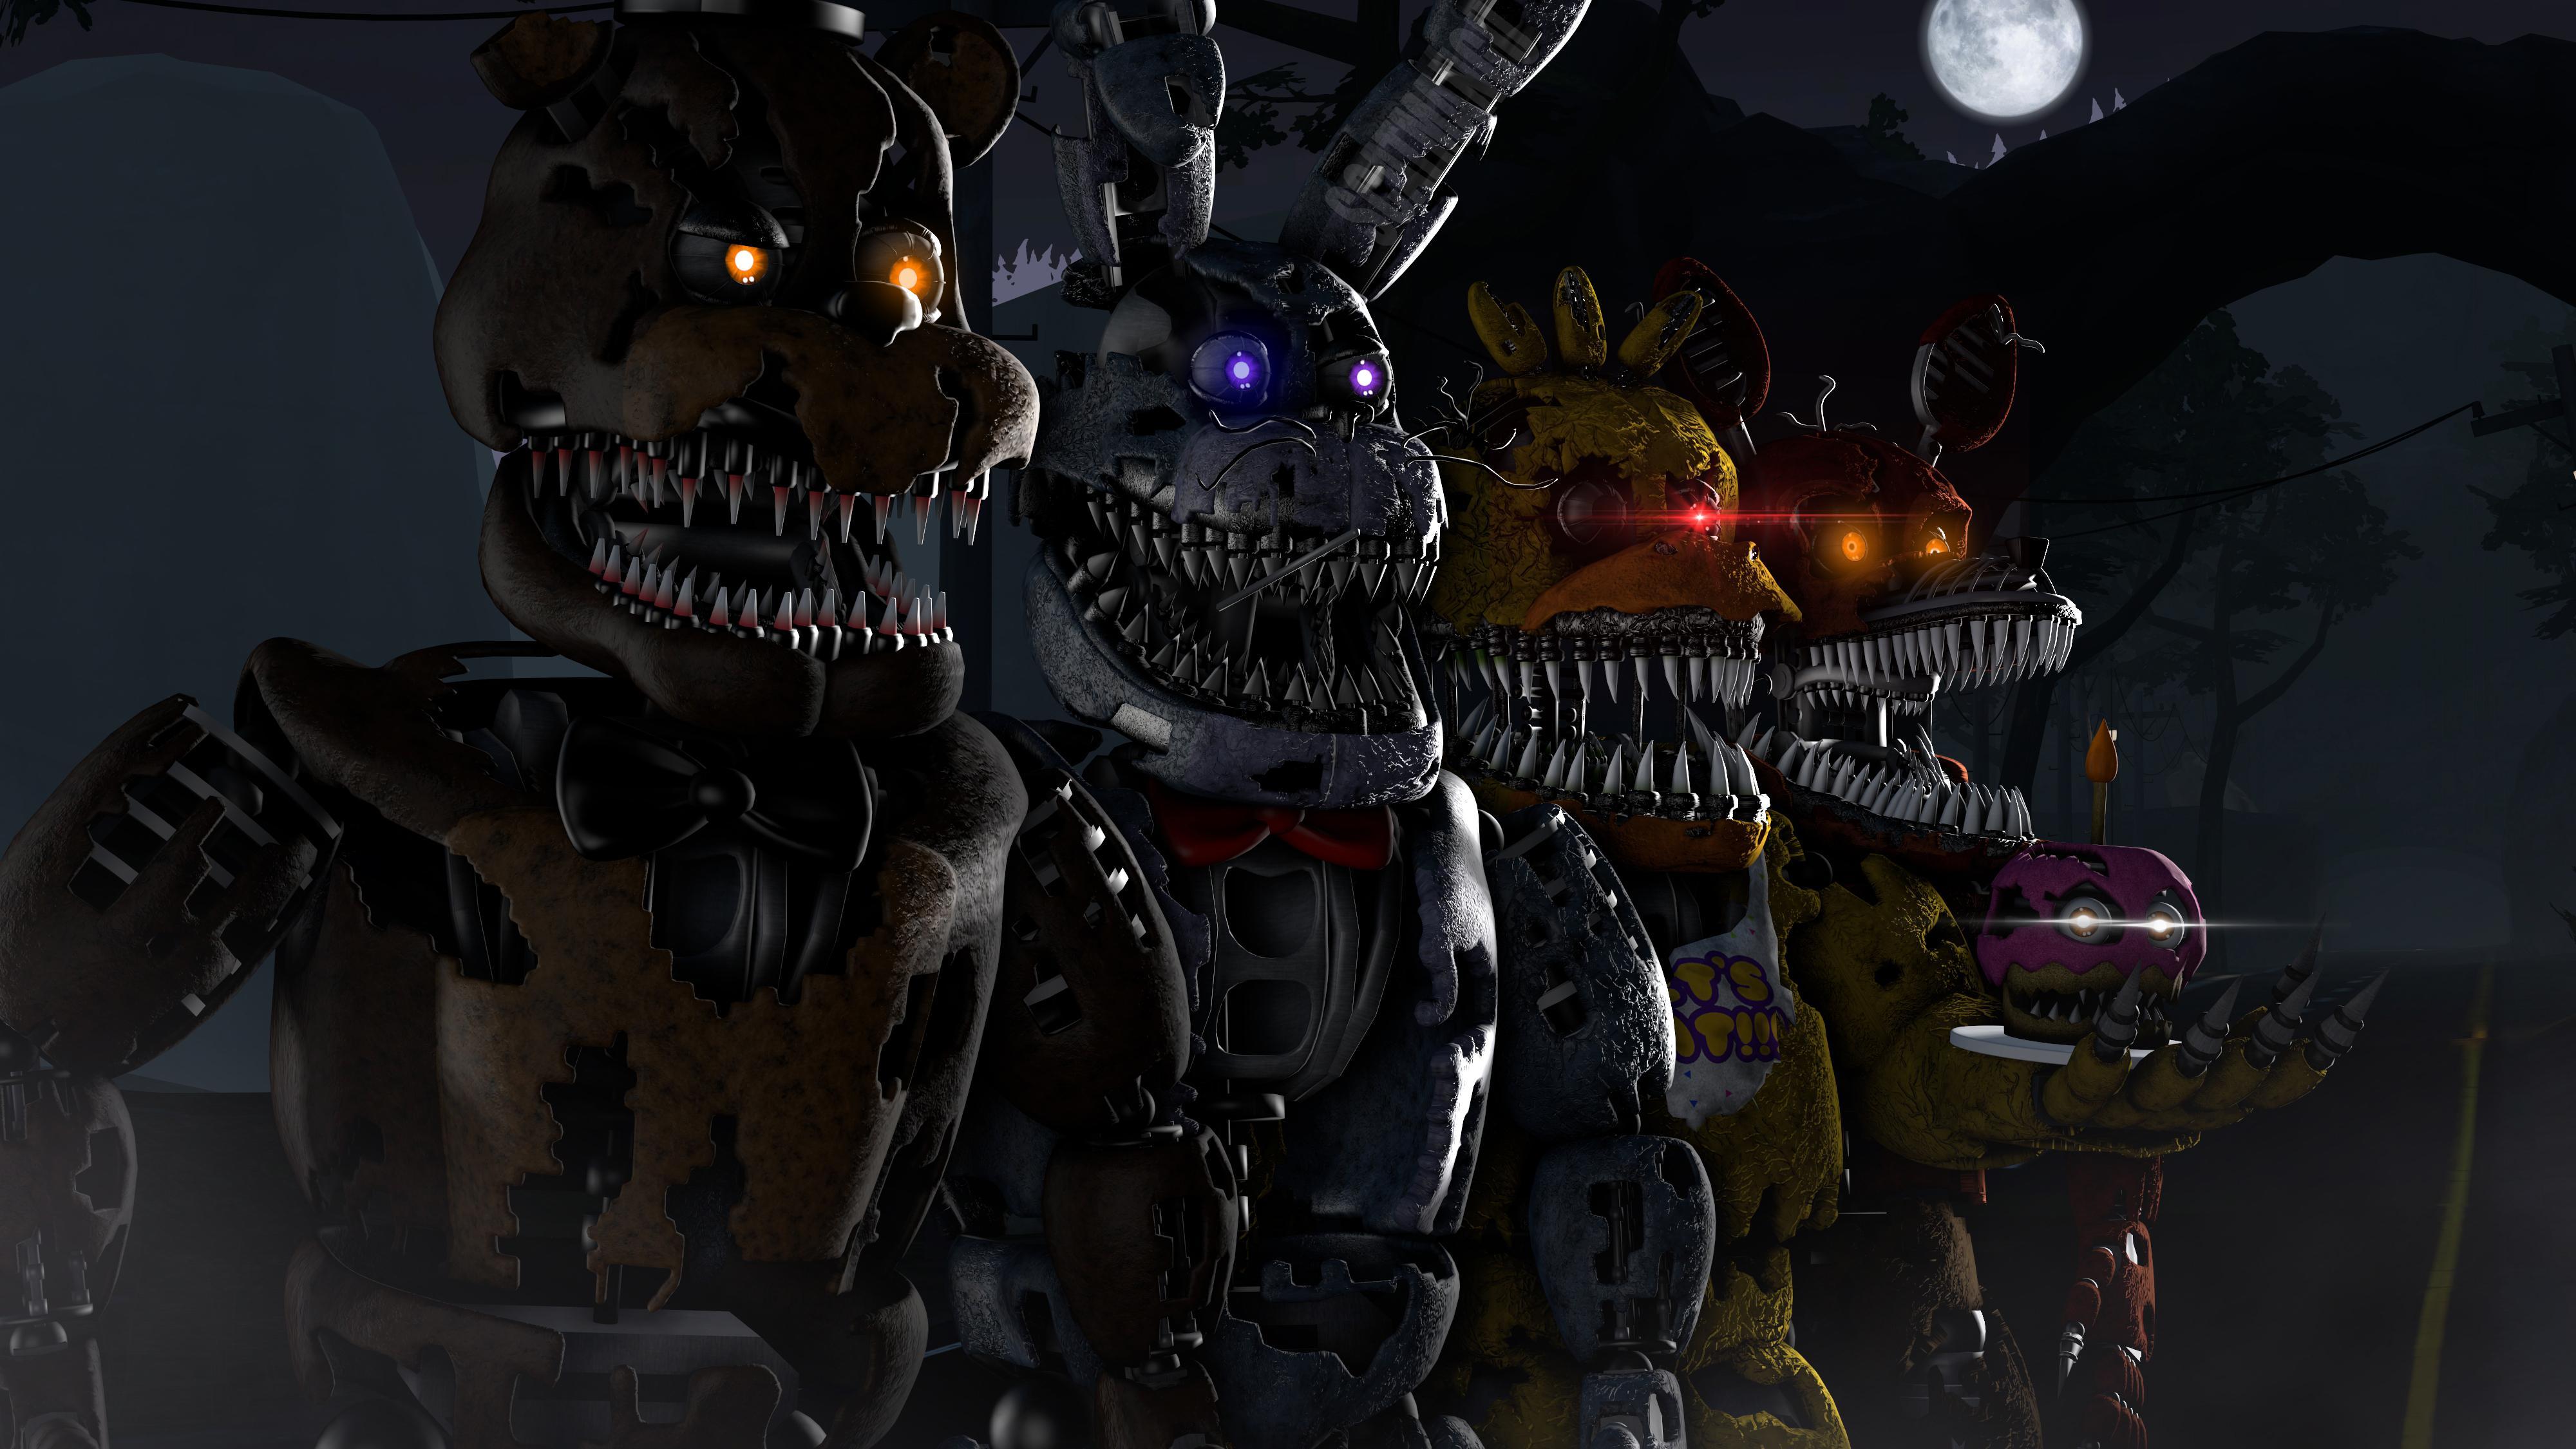 Five Nights at Freddy's 4 4k Ultra HD Wallpapers.